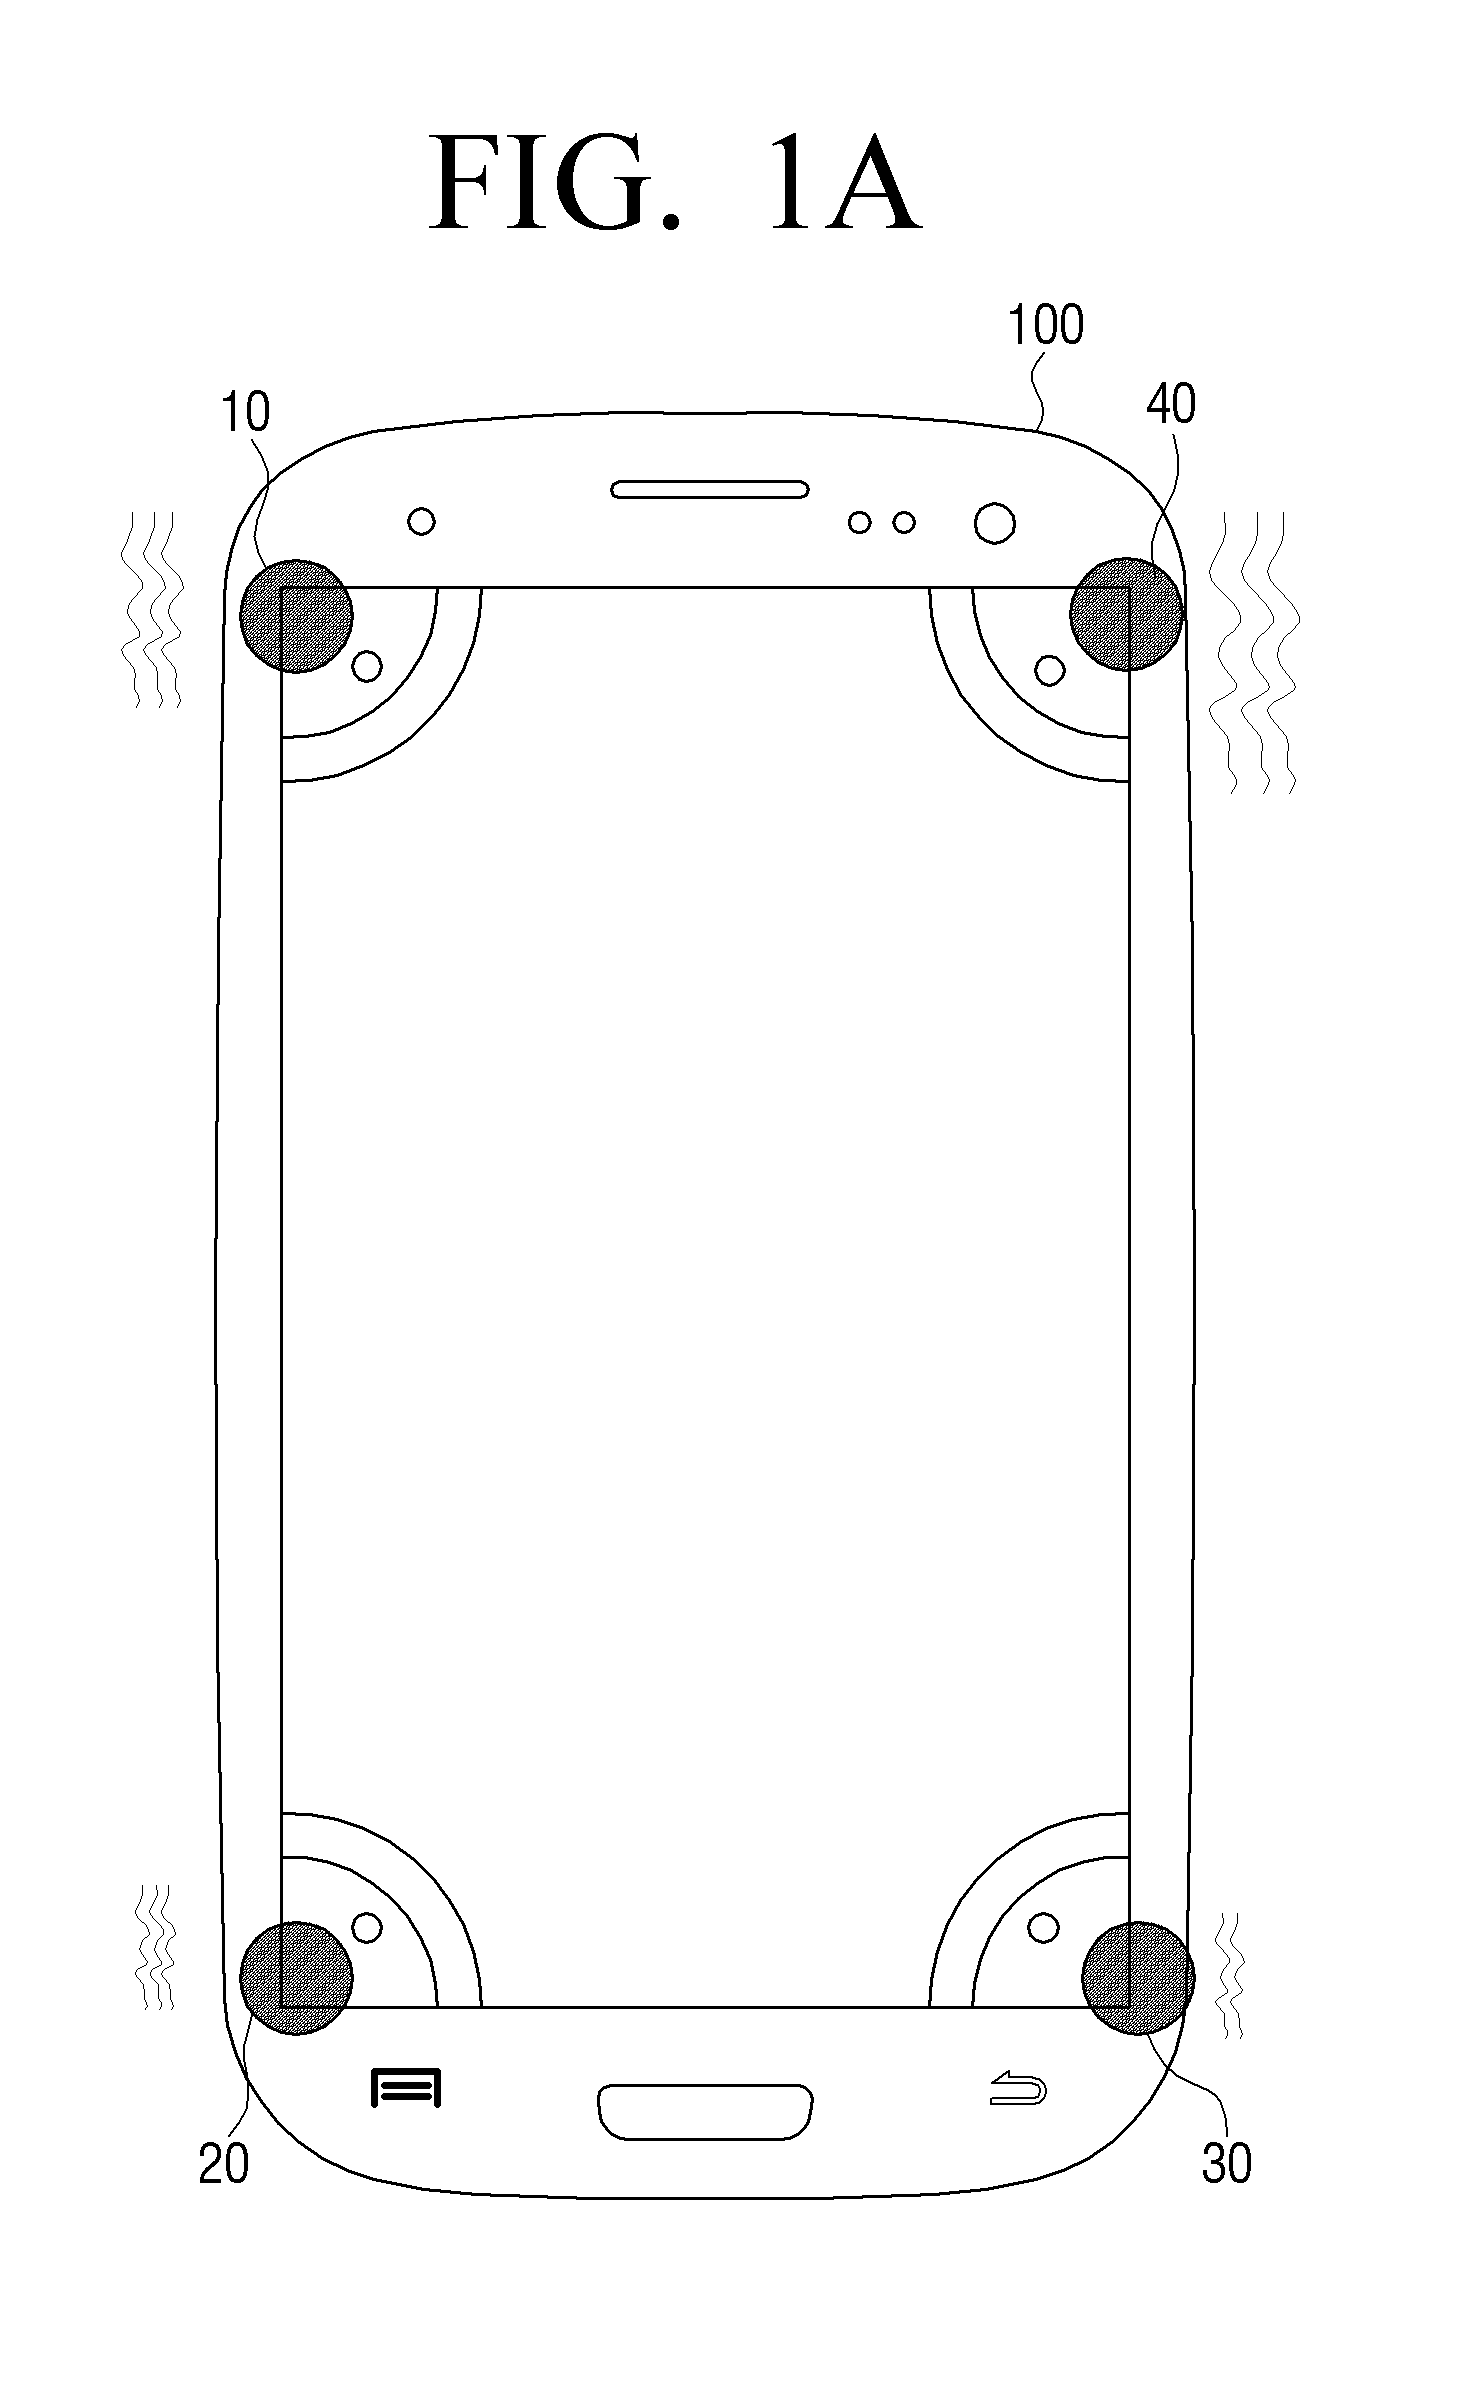 Display apparatus and method for performing function of the same